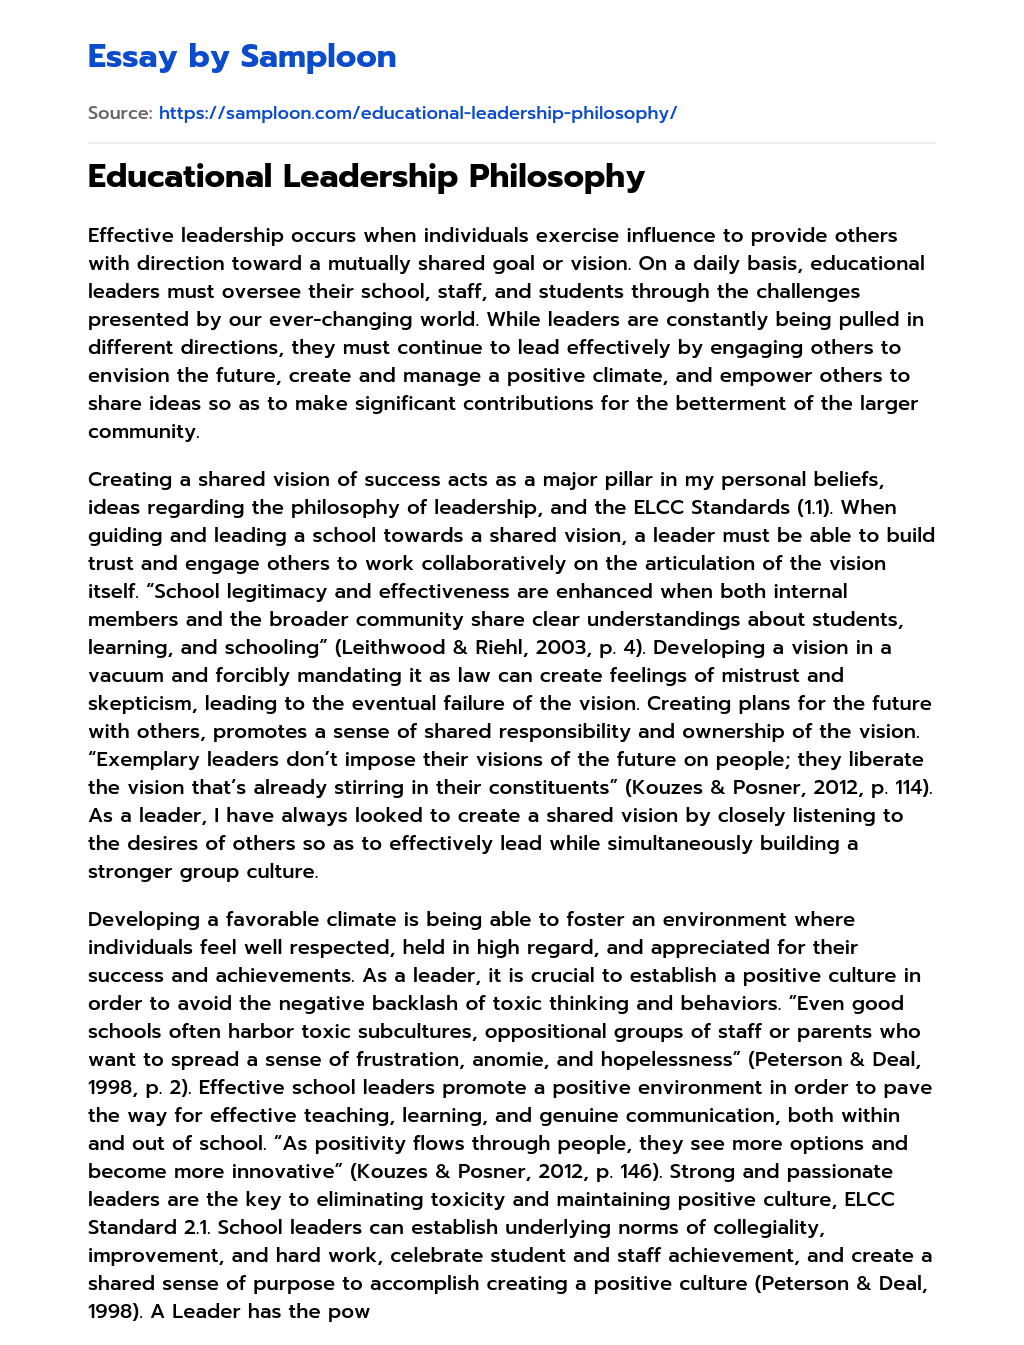 reaction paper about educational leadership